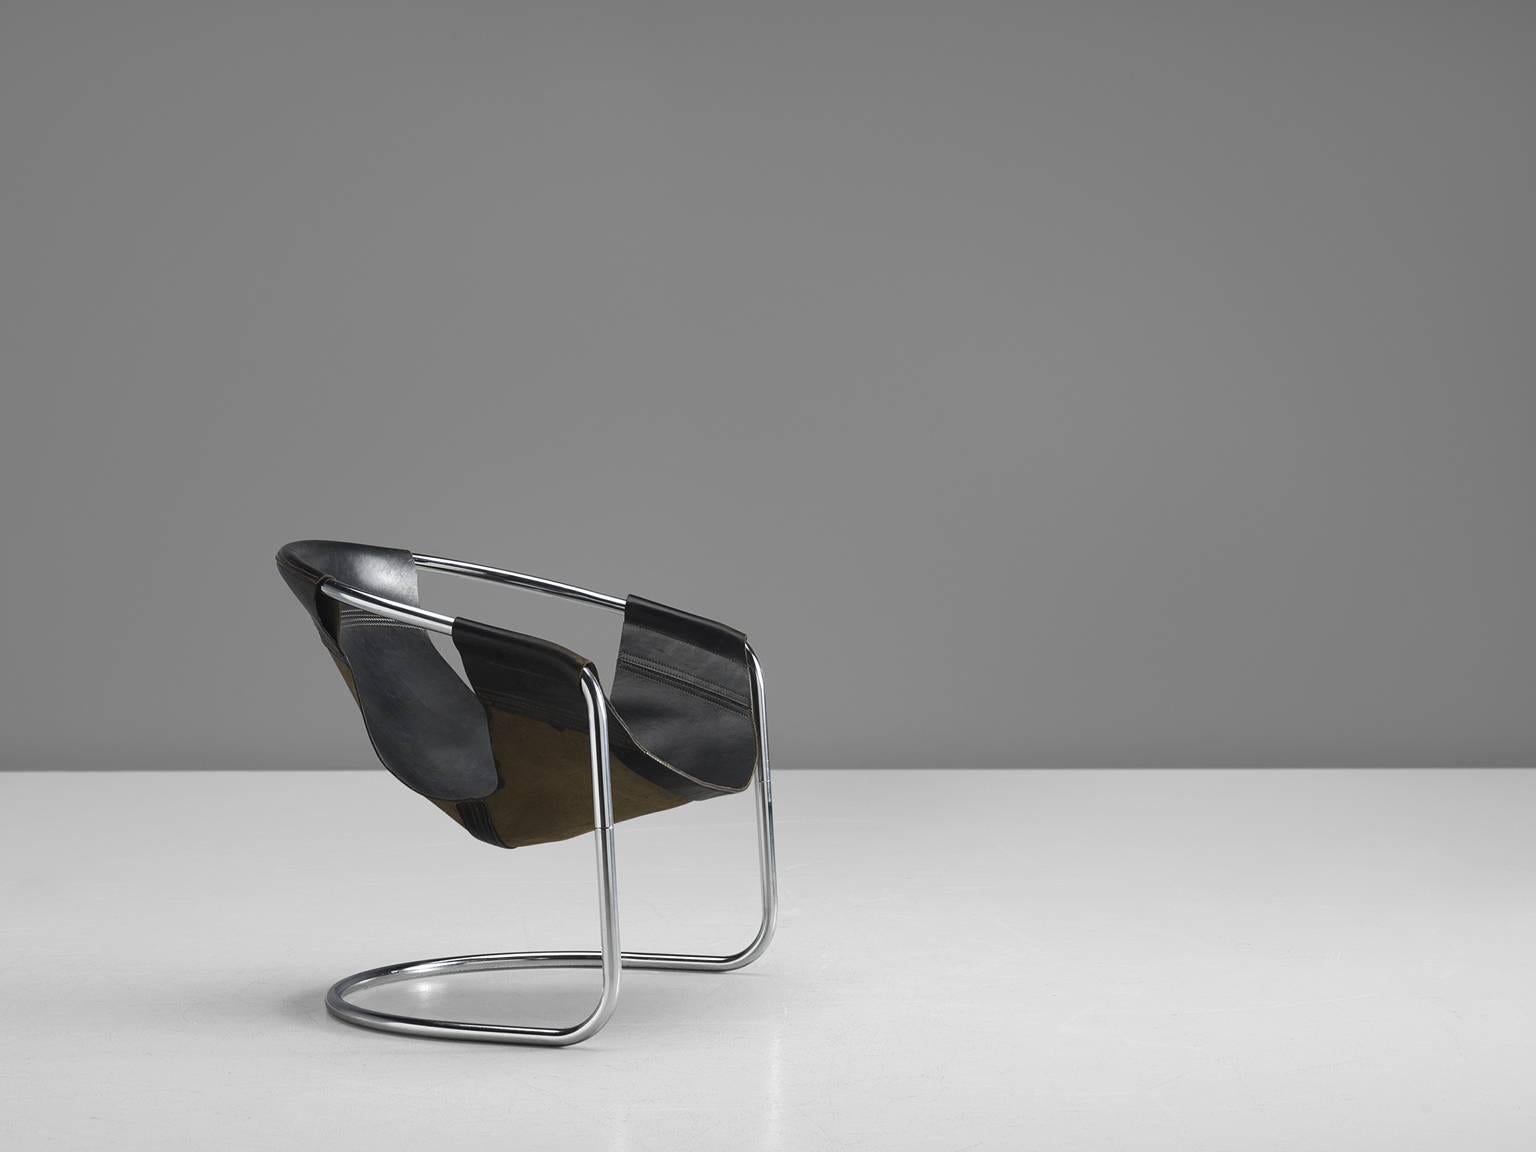 Chair, black leather and chrome, 1965, The Netherlands.

This brown leather chair is both geometric and rustic in its style. The lounge chair was designed by Clemens Claessen for Ba-as Eindhoven in 1965. These chairs were made on a very small-scale